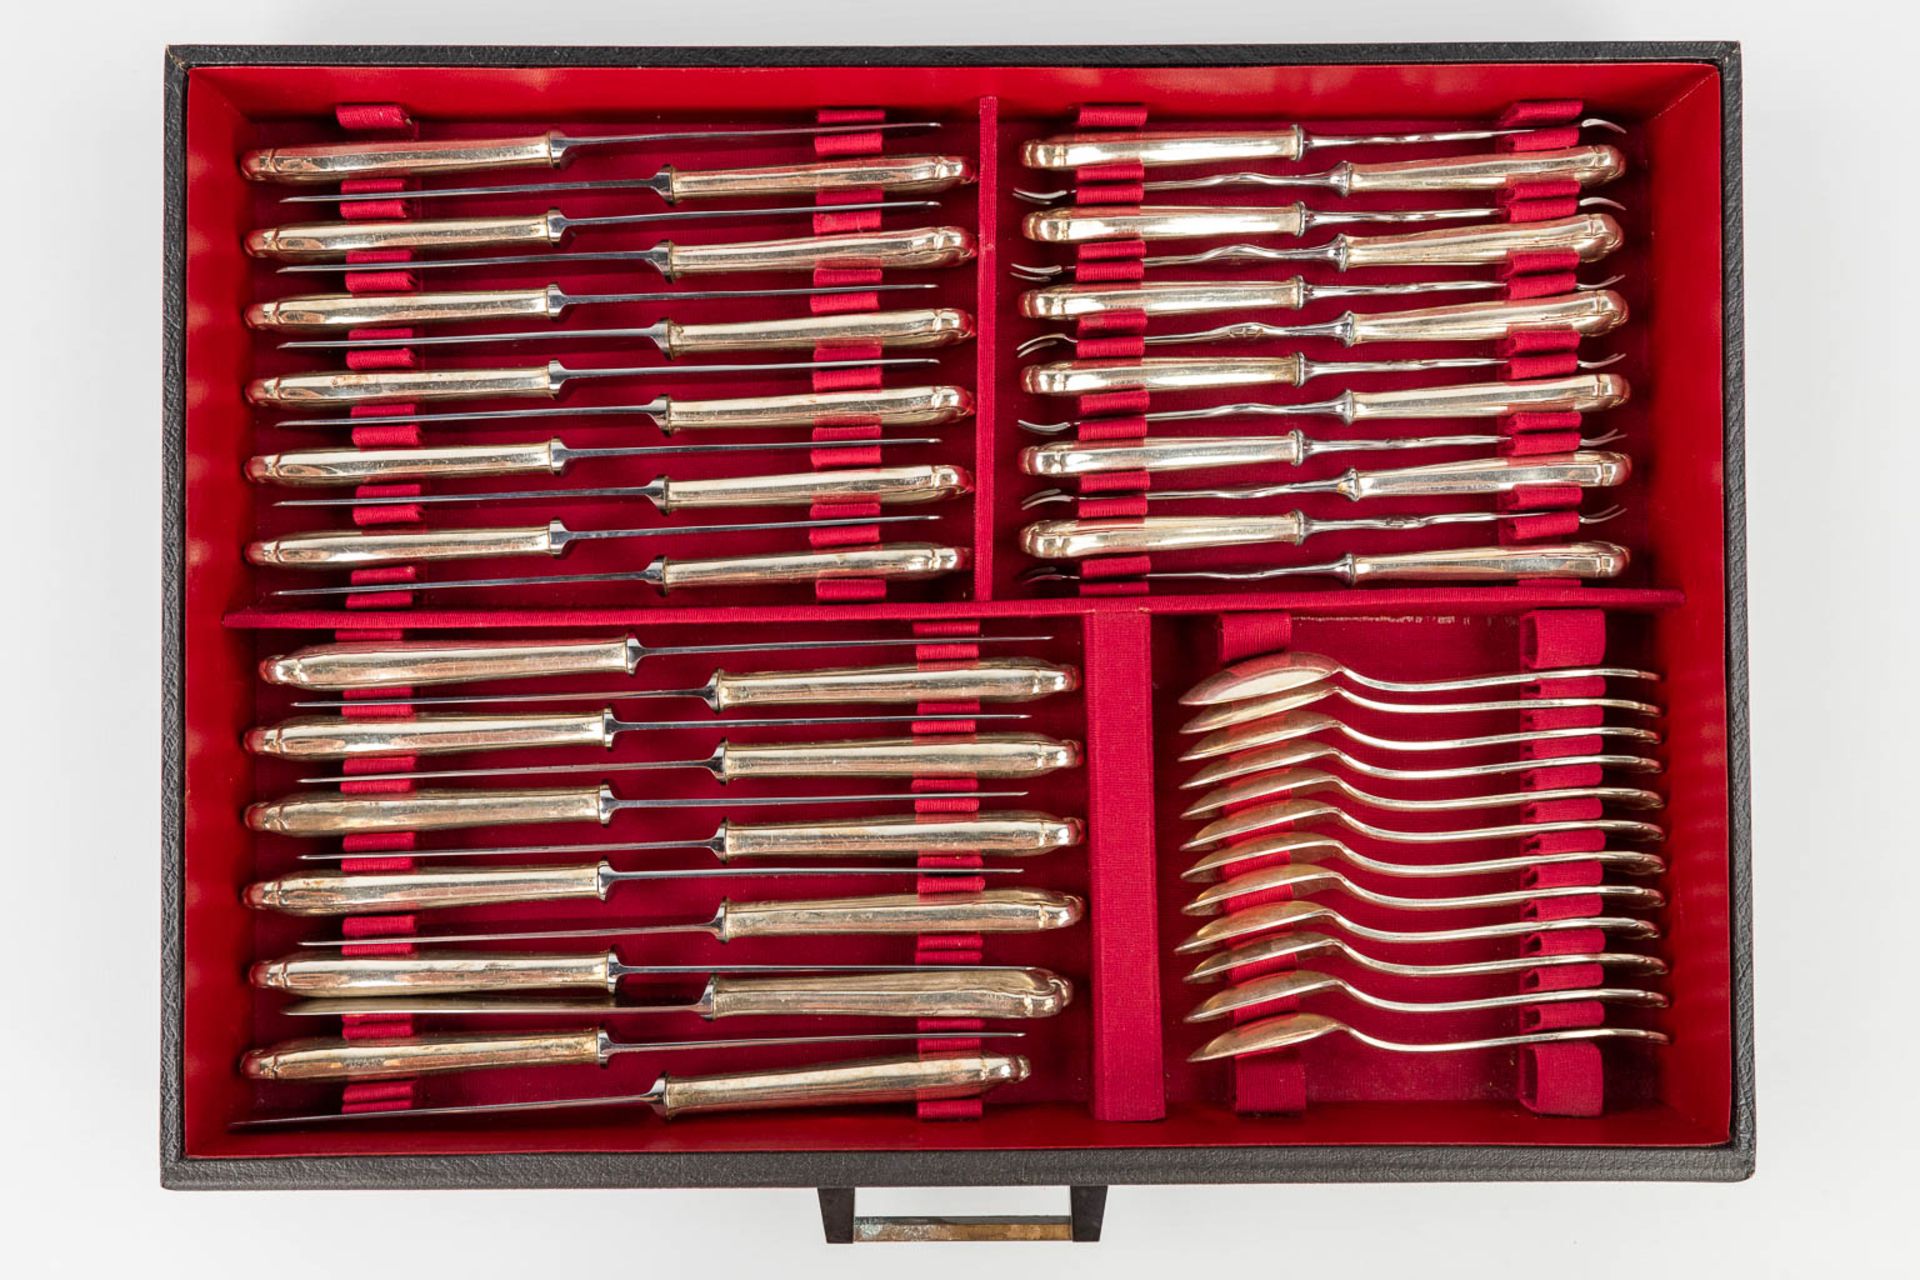 A 148-piece silver cutlery set in a chest, made in Germany. 6585g. (L:34 x W:46 x H:31 cm) - Image 3 of 12